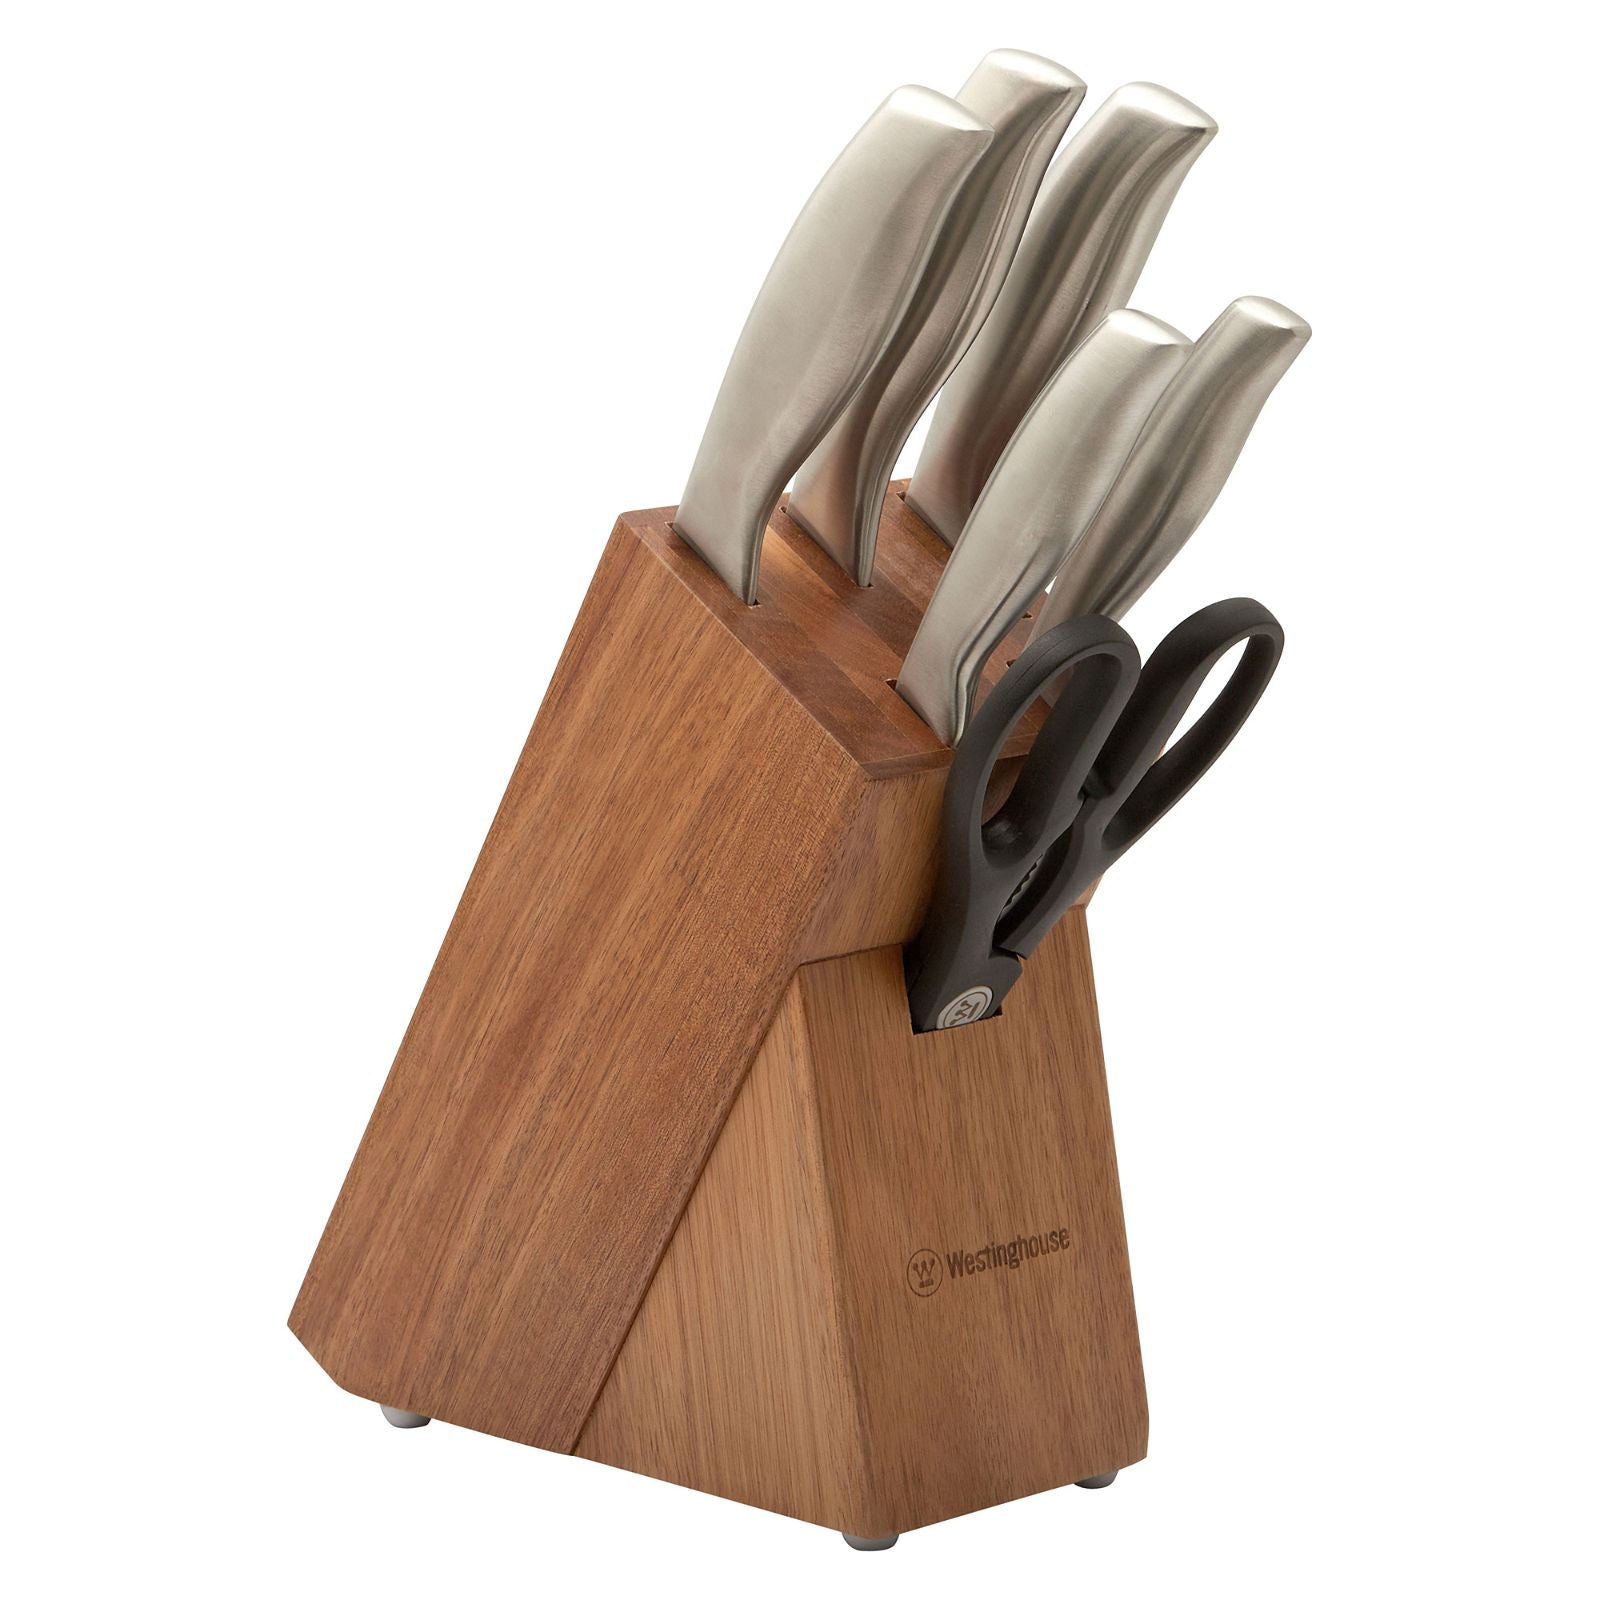 Westinghouse 7 Piece Knife Block Set Acacia Wood-#product_category#- Distributed by:  under license